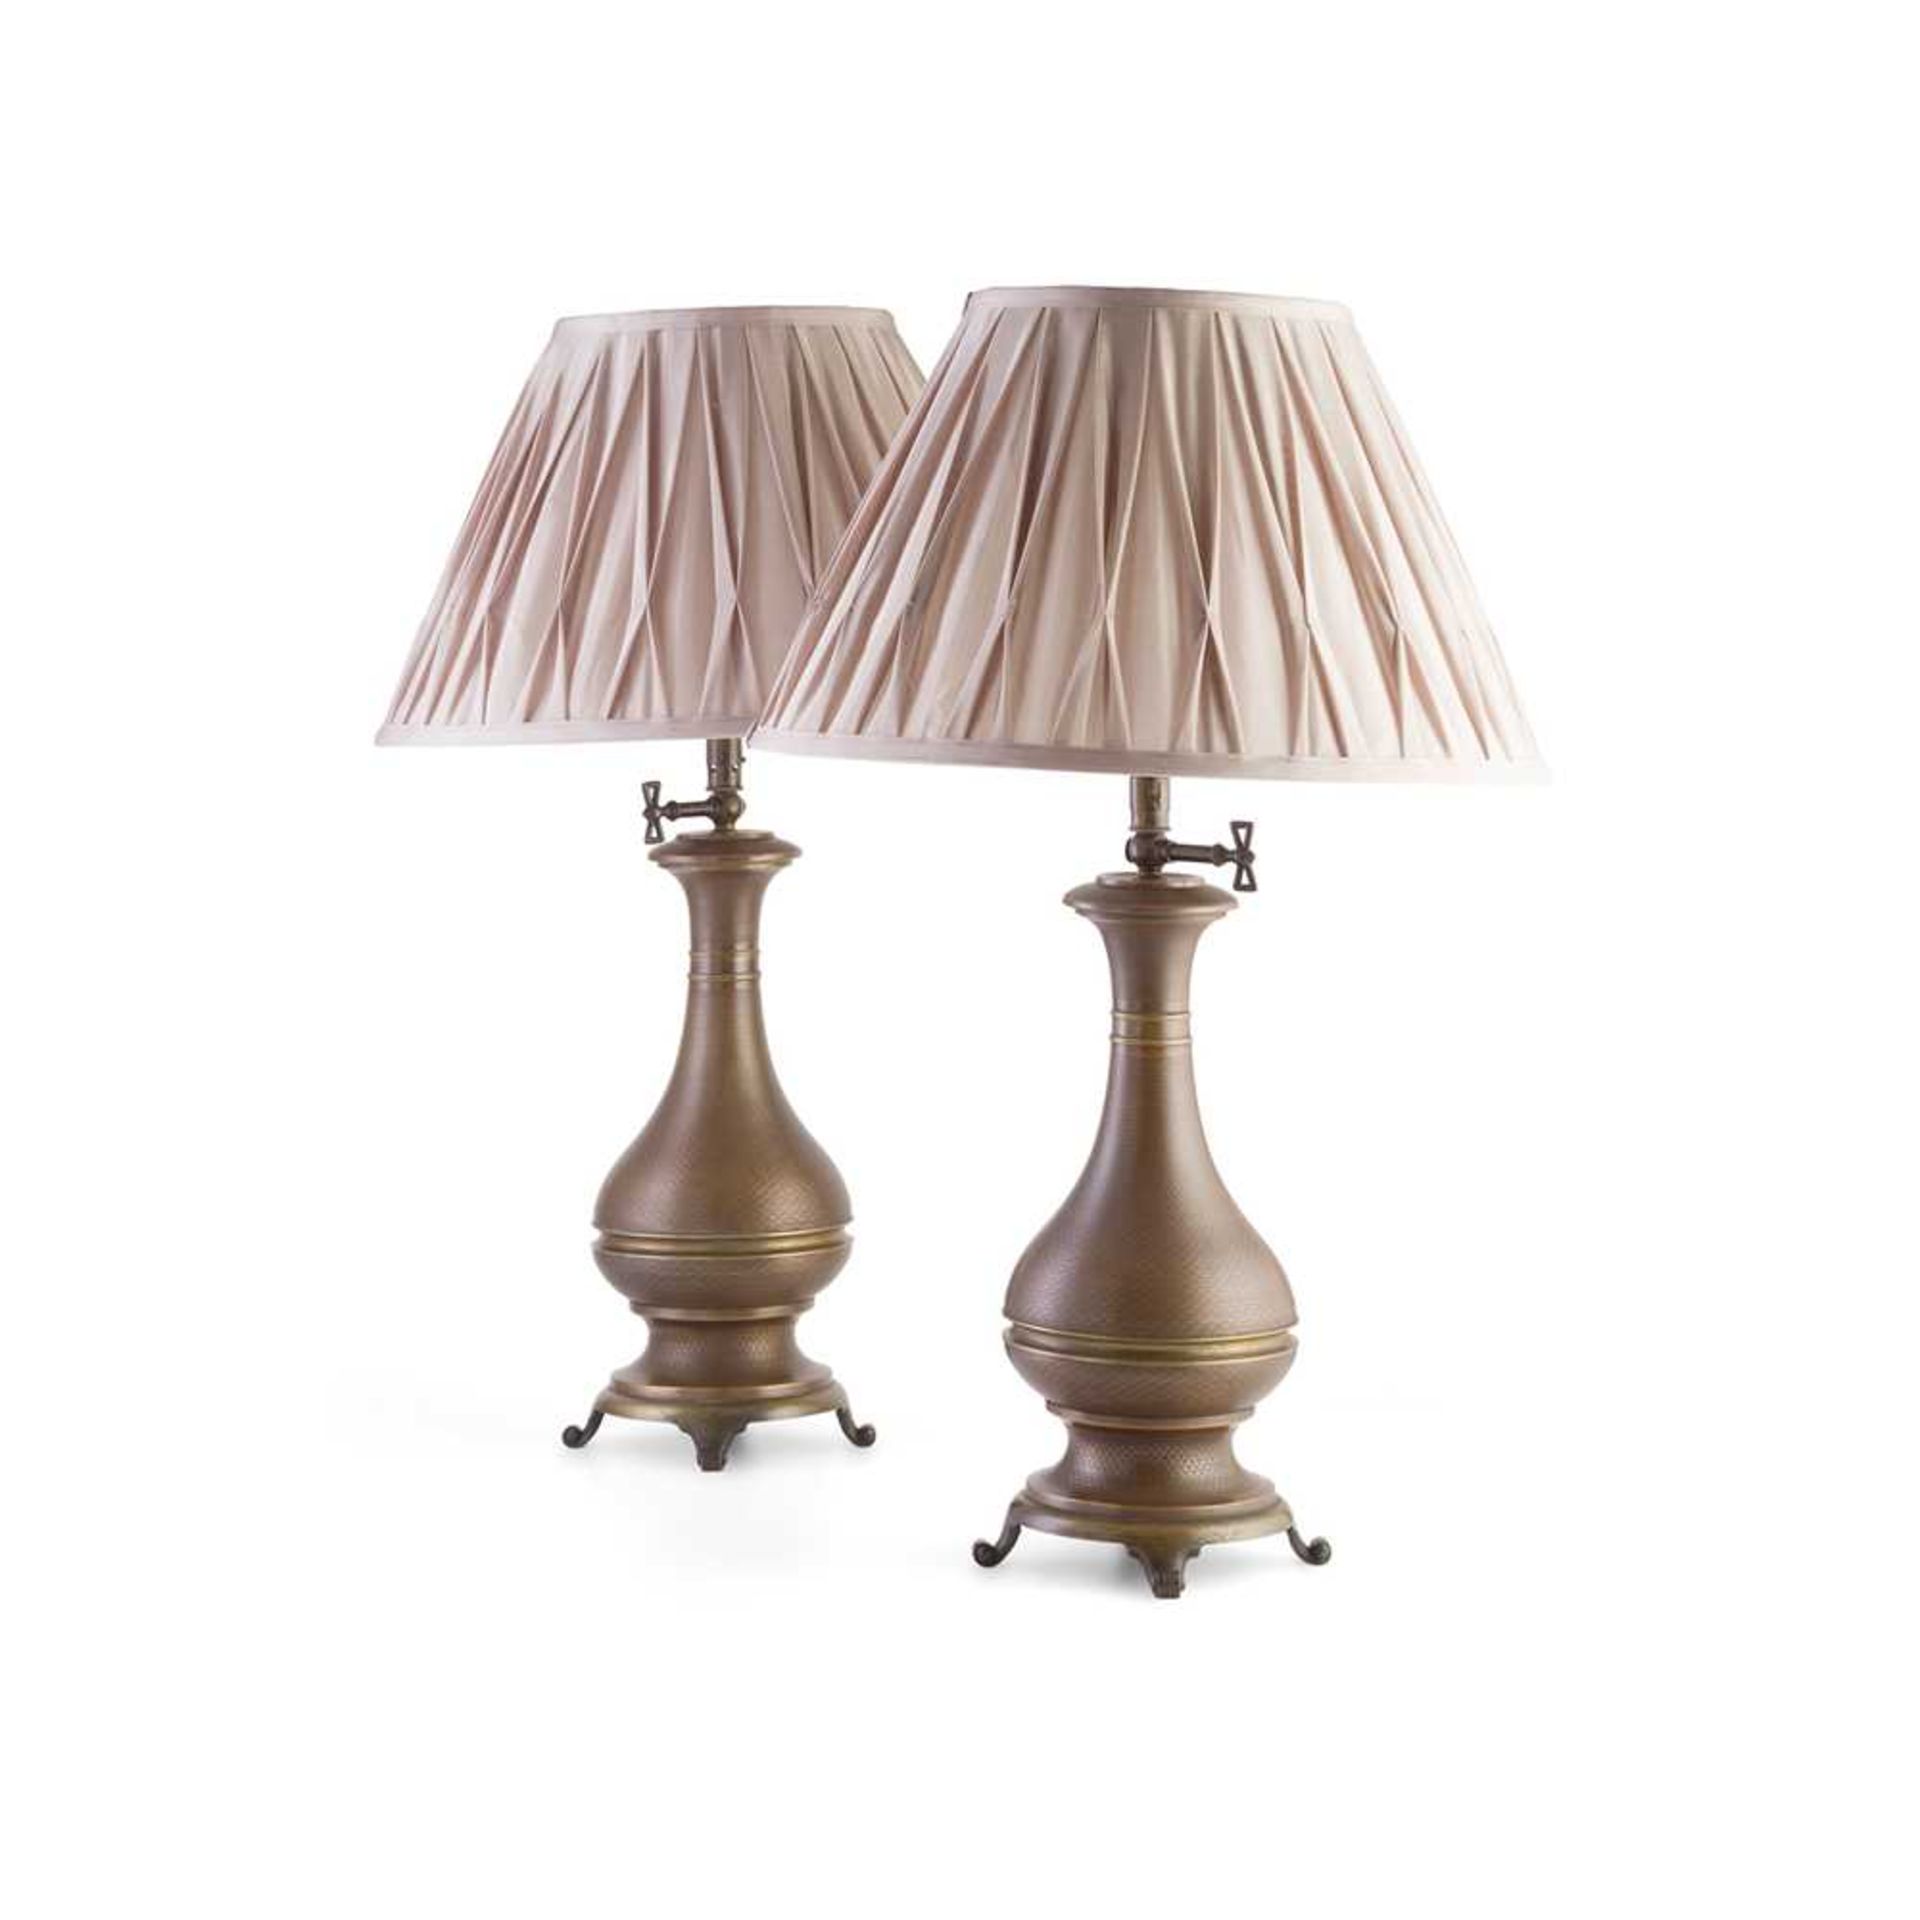 PAIR OF FRENCH BRONZE MODERATOR LAMPS 19TH CENTURY